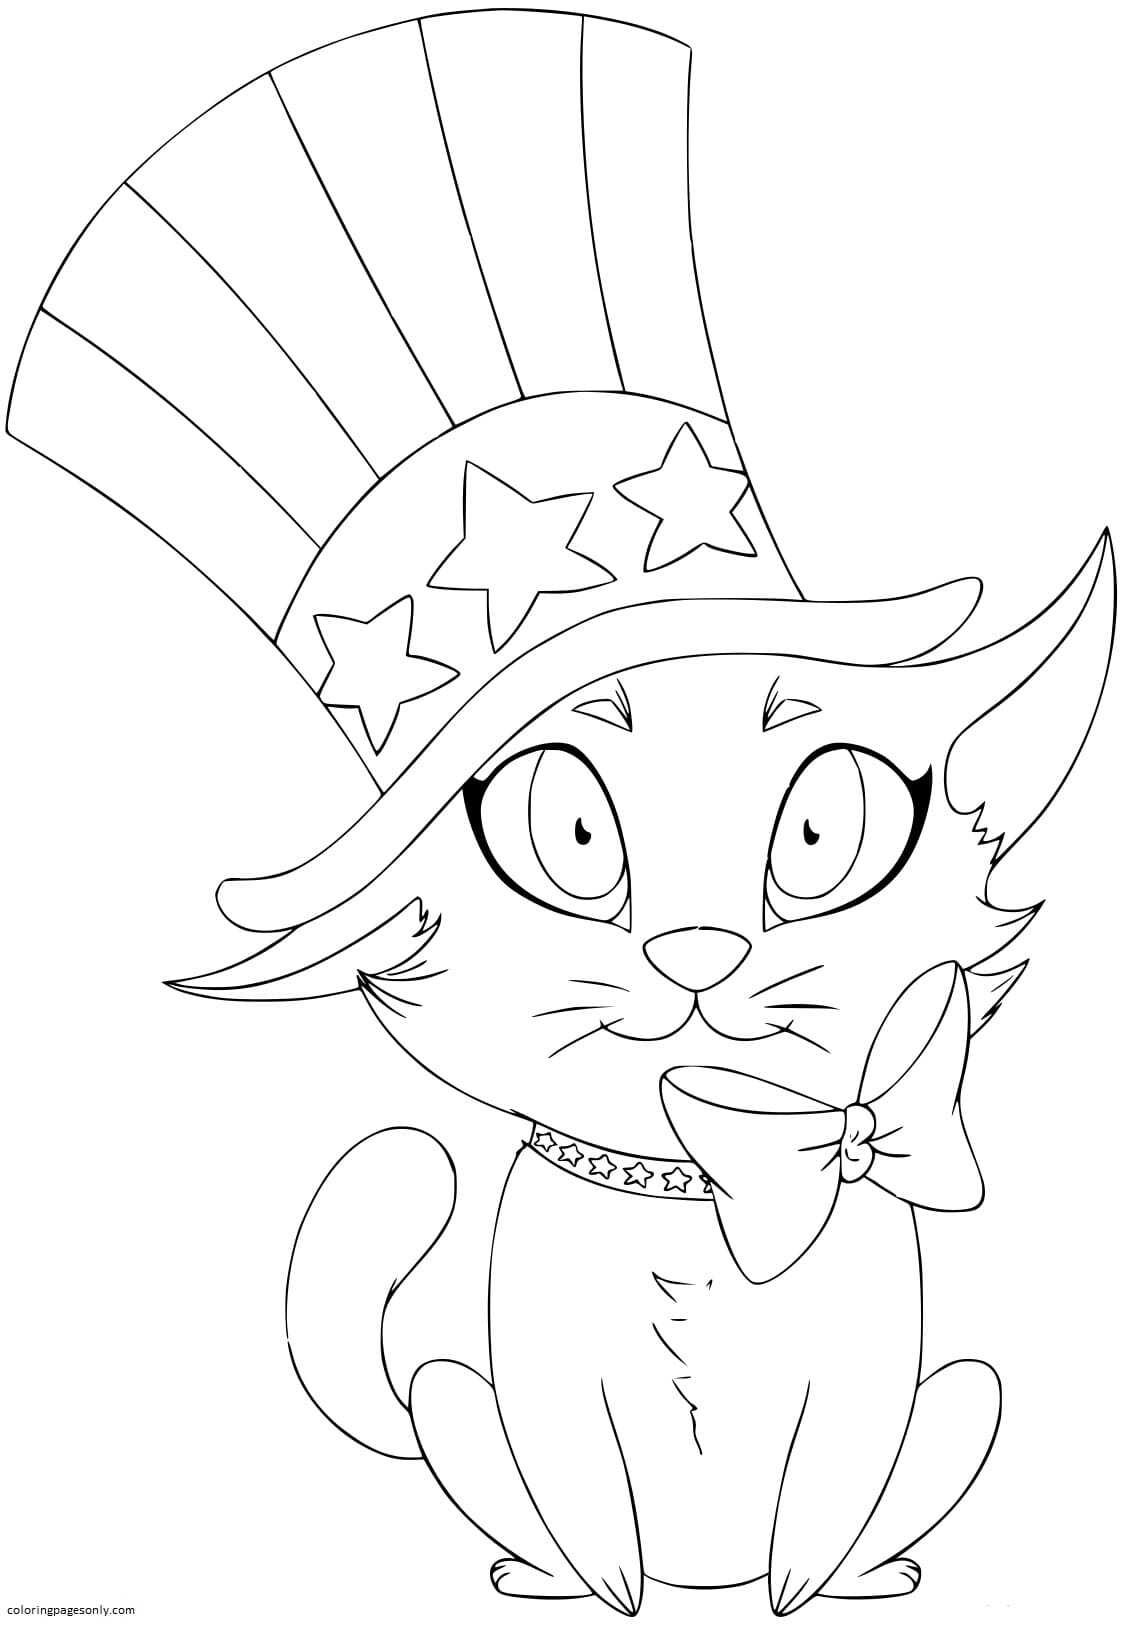 A Kitten Wearing a hat designed as the American Flag Coloring Page